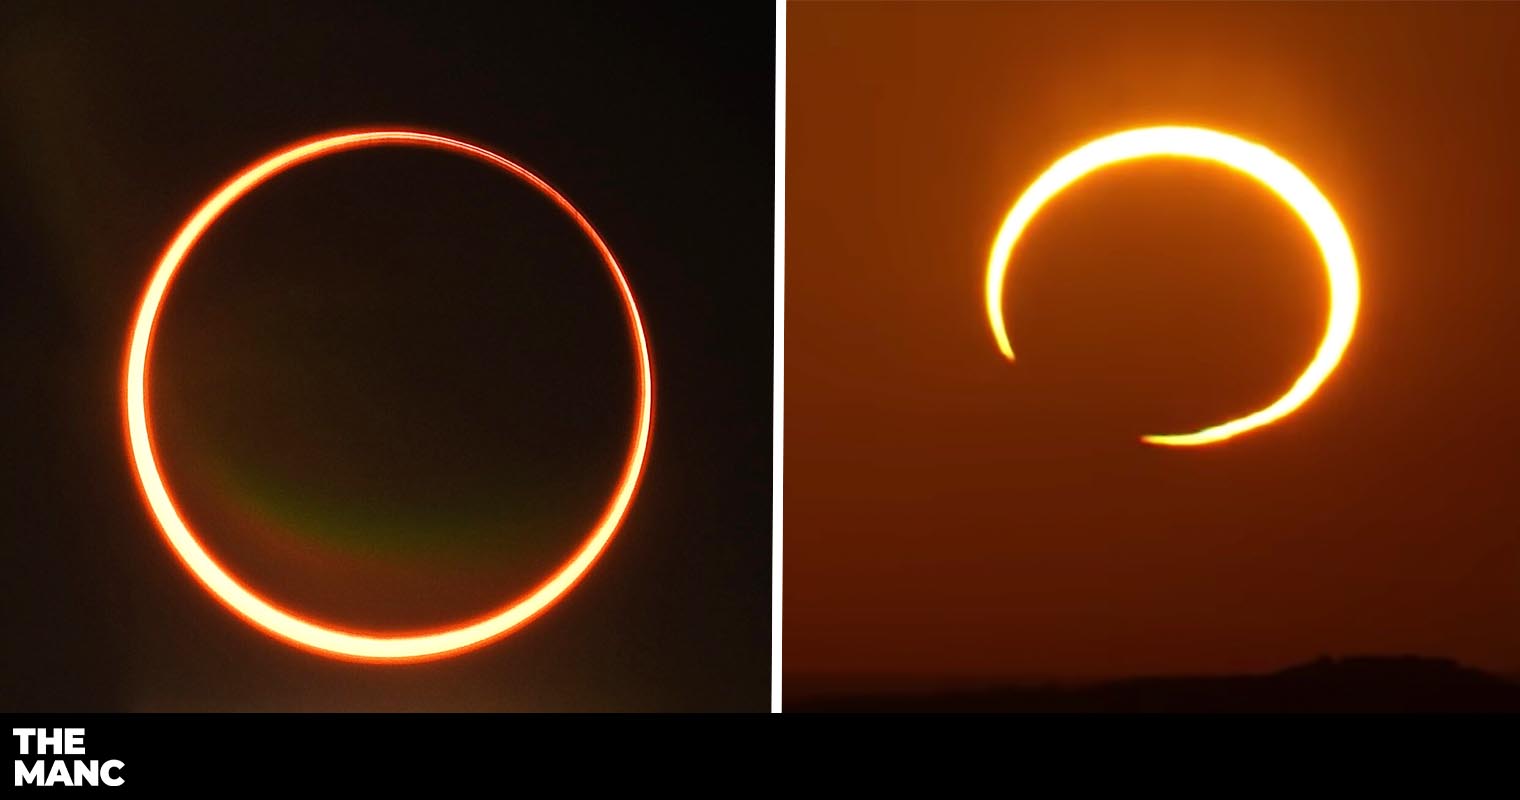 NASA share images of what the 'ring of fire' eclipse this weekend might